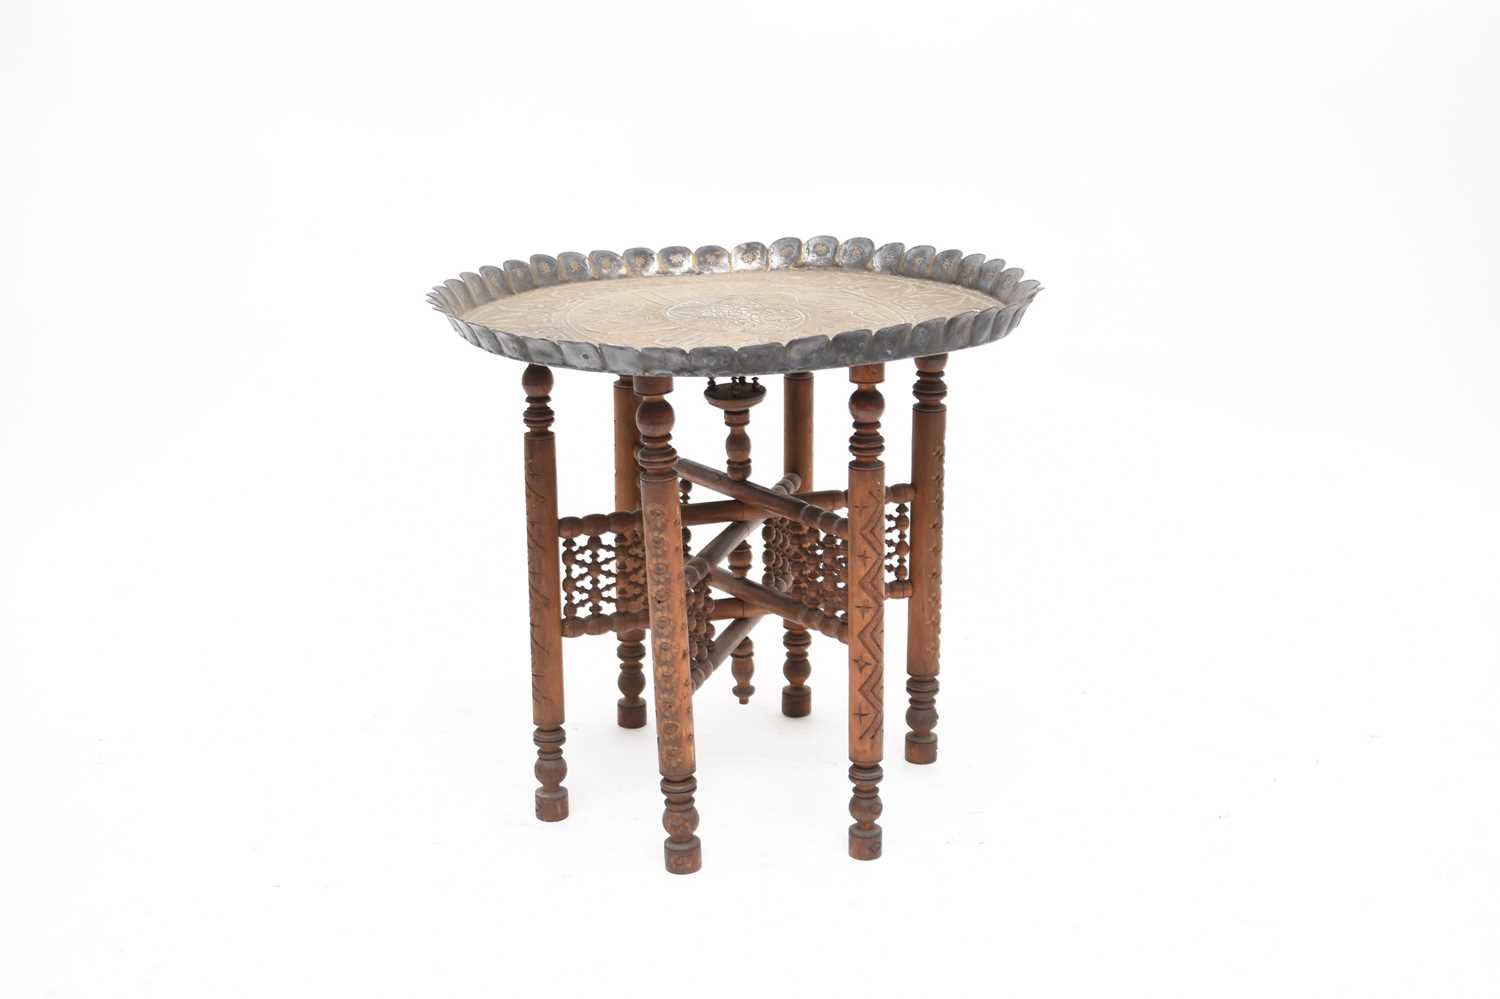 A 20th century Middle Eastern, Ottoman style table